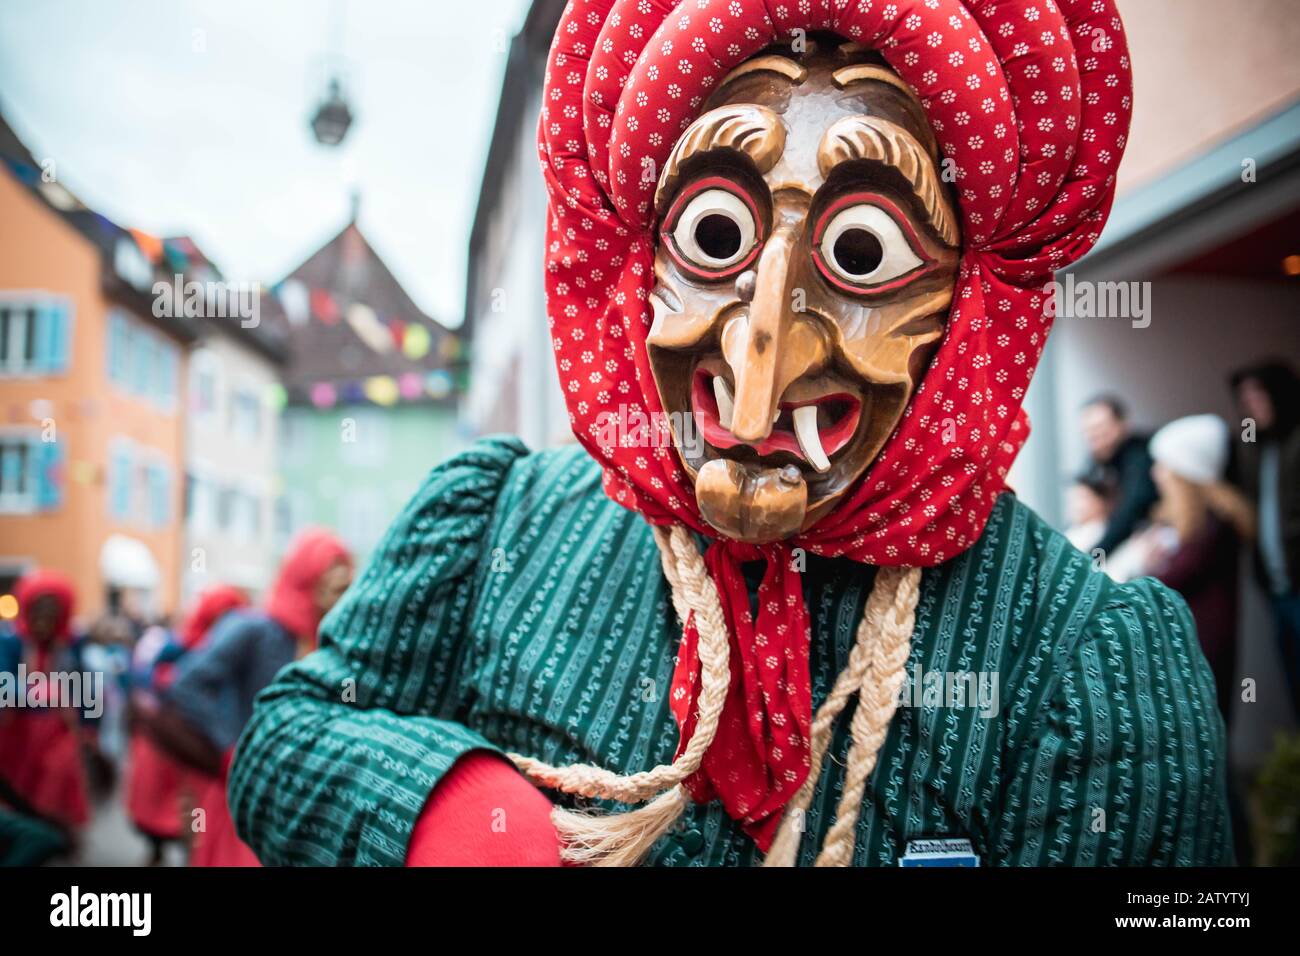 Kandel witch from Waldkirch, beautiful witch in blue-red looks very surprised at the camera during the carnival parade in Staufen, southern Germany. Stock Photo